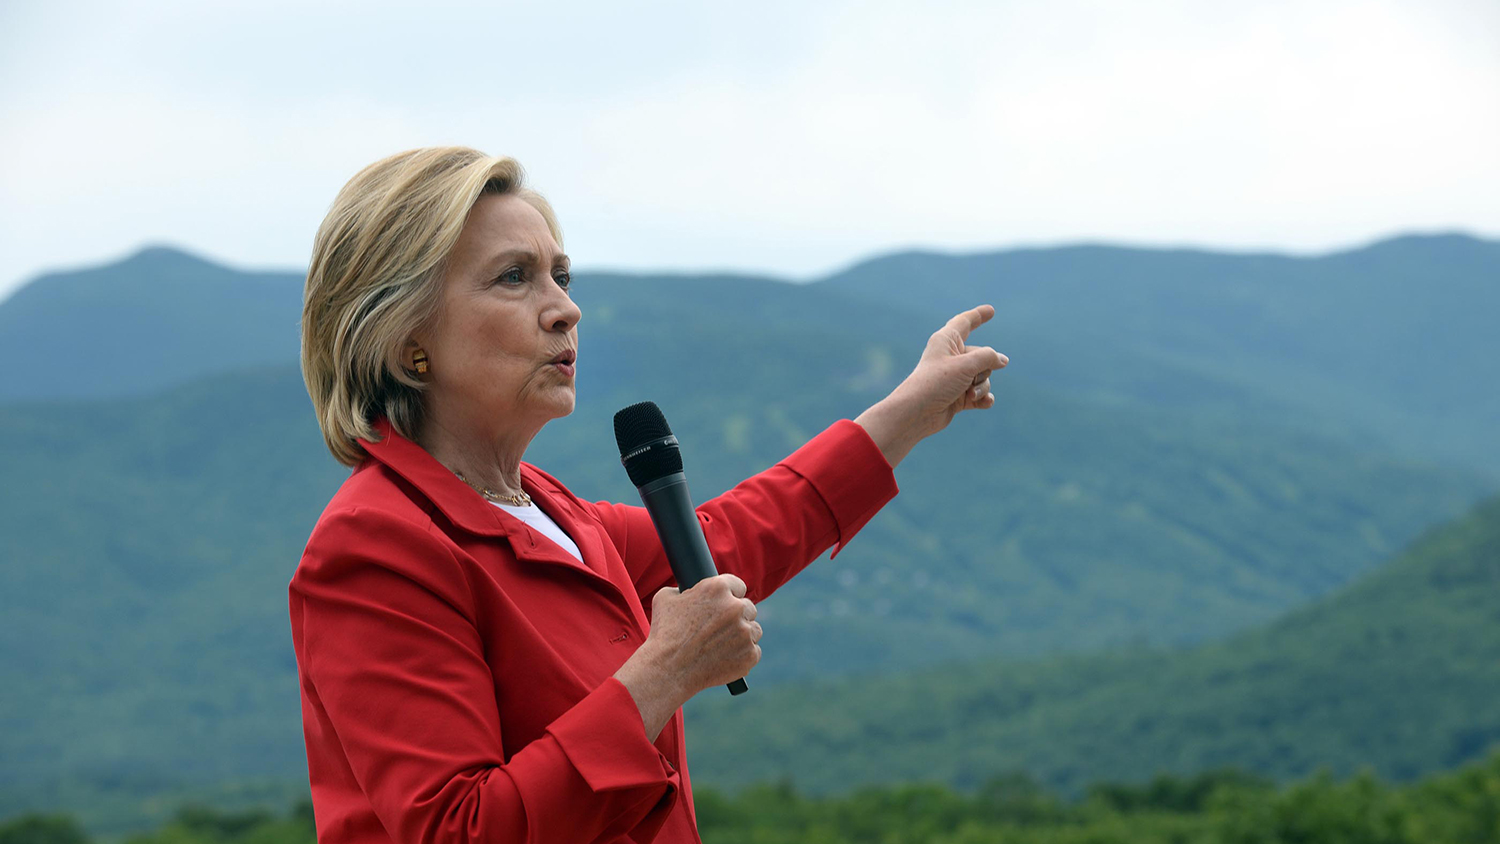 Democratic president candidate Hillary Clinton speaks at an organizing event at a private home July 4, 2015 in Glen, New Hampshire.
